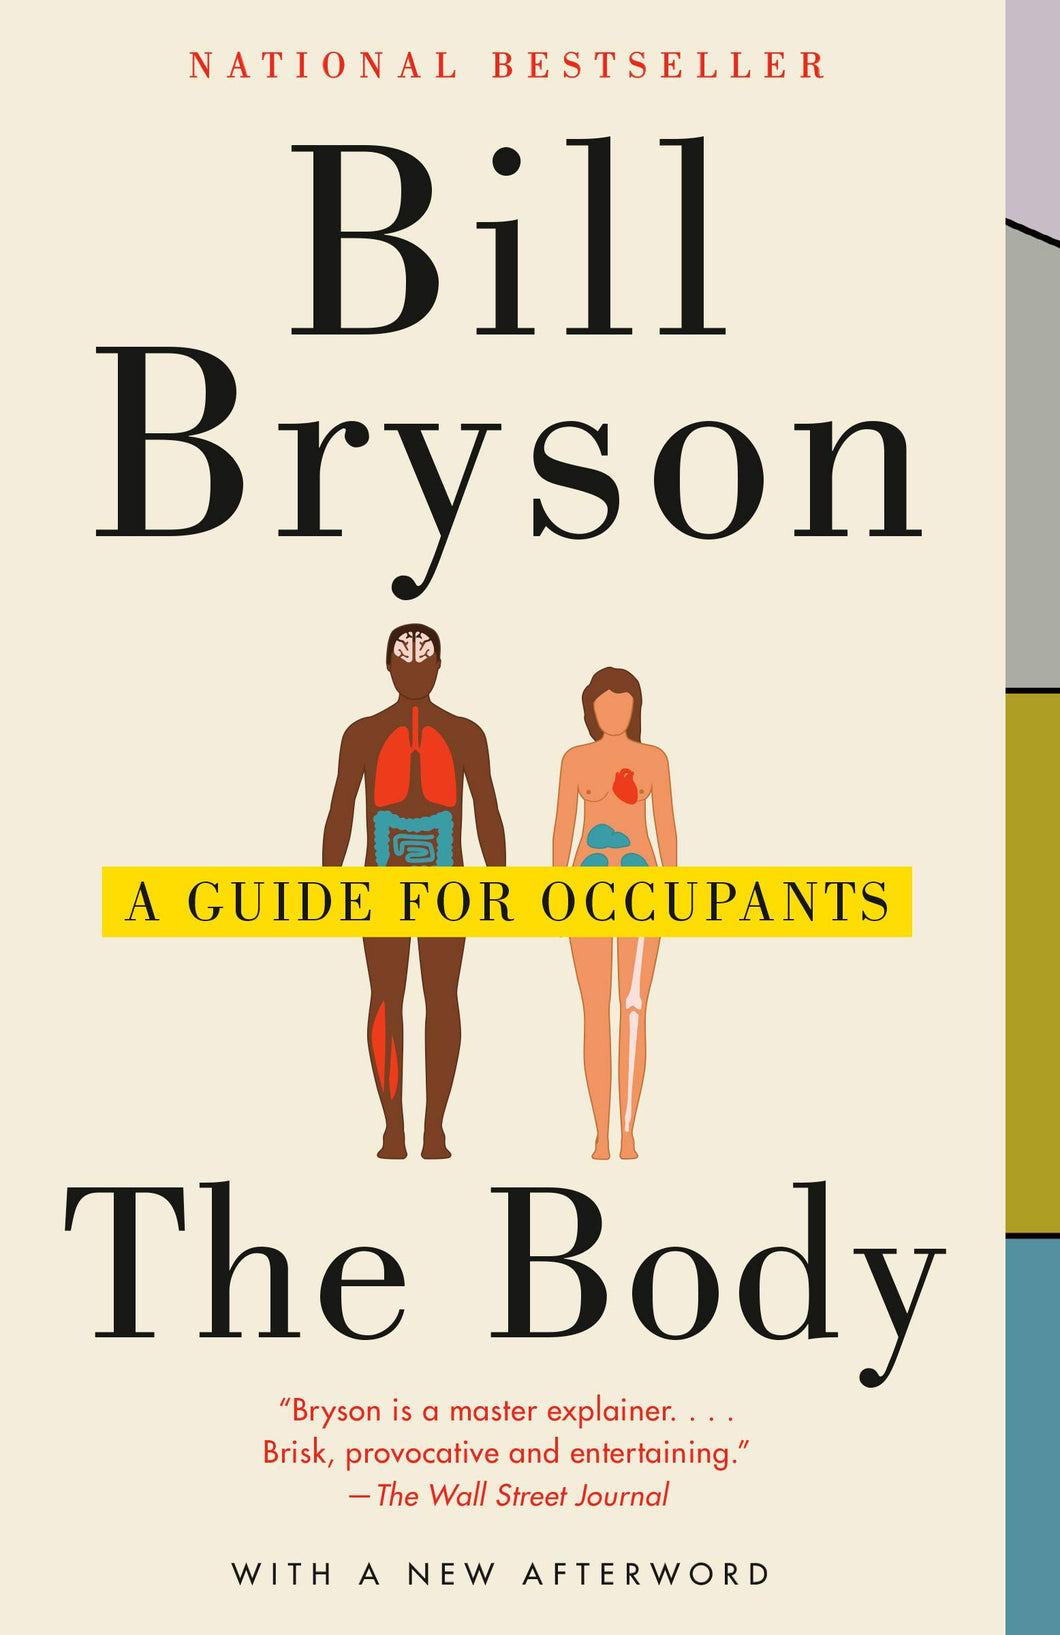 The Body: A Guide for Occupants [Bill Bryson]